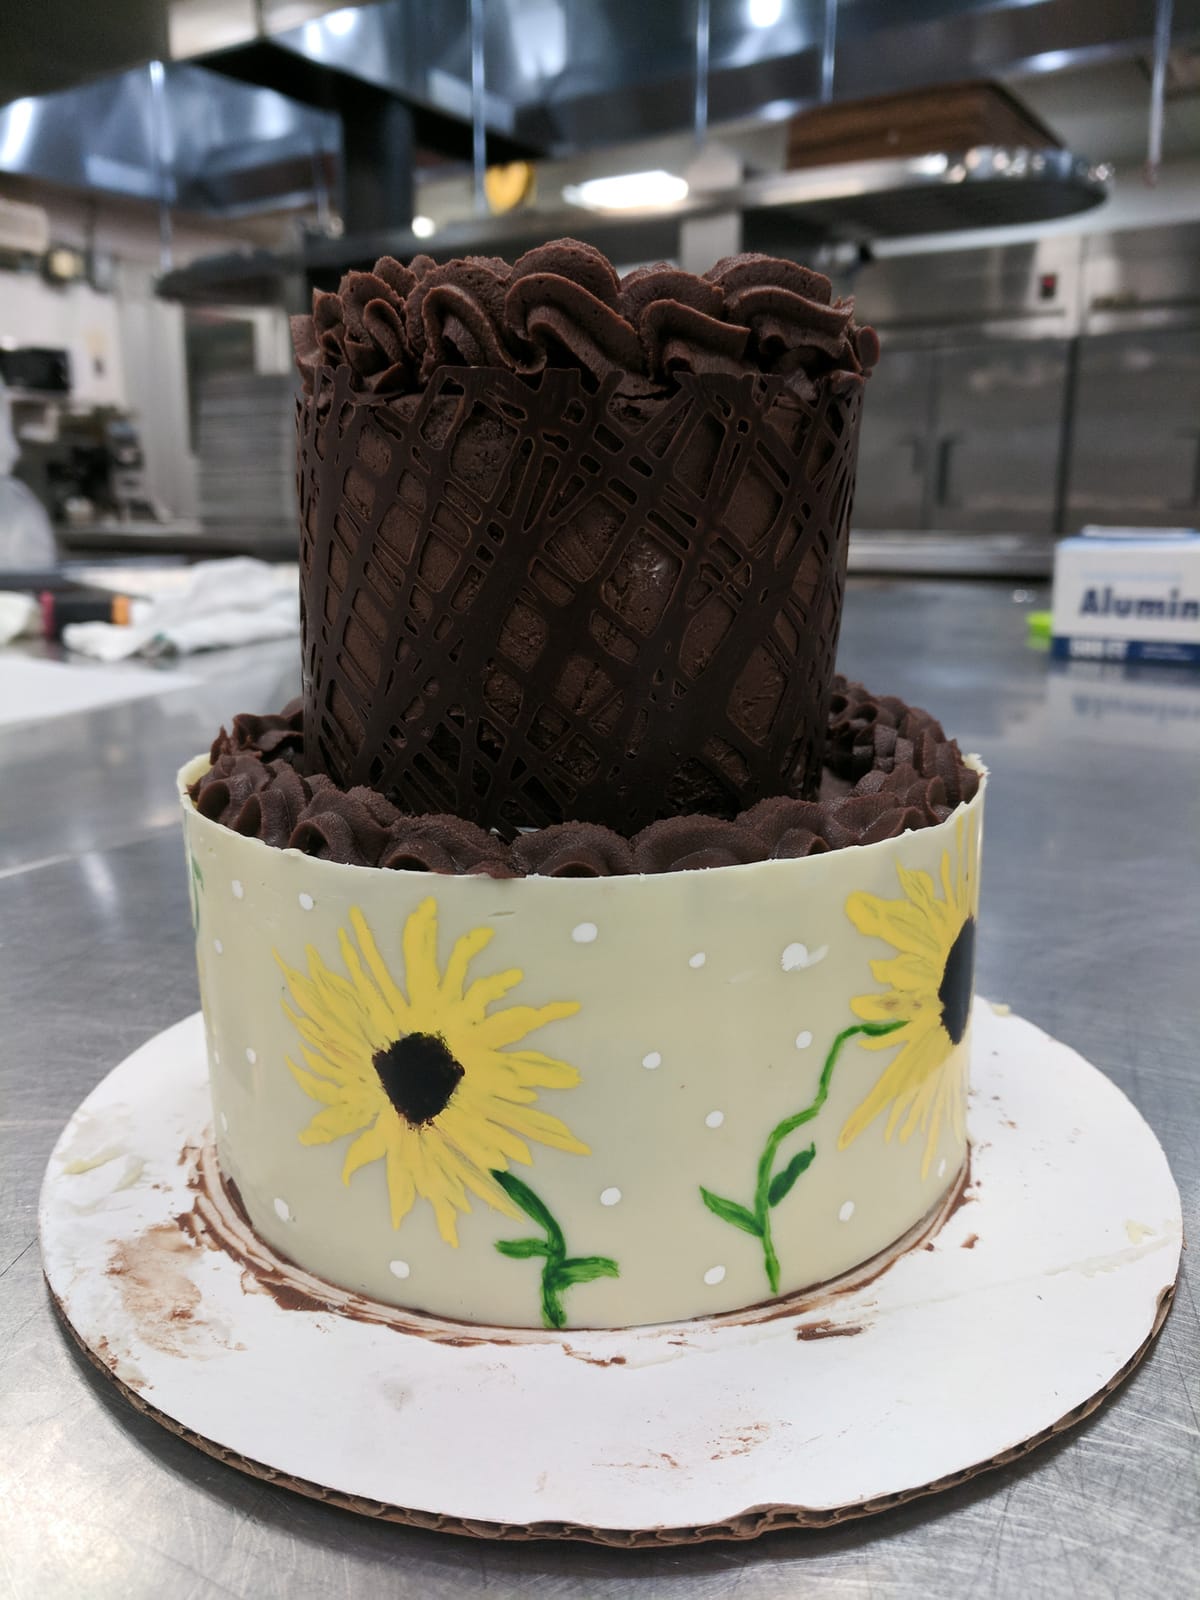 Two-tiered cake with a chocolate collar and sunflower design